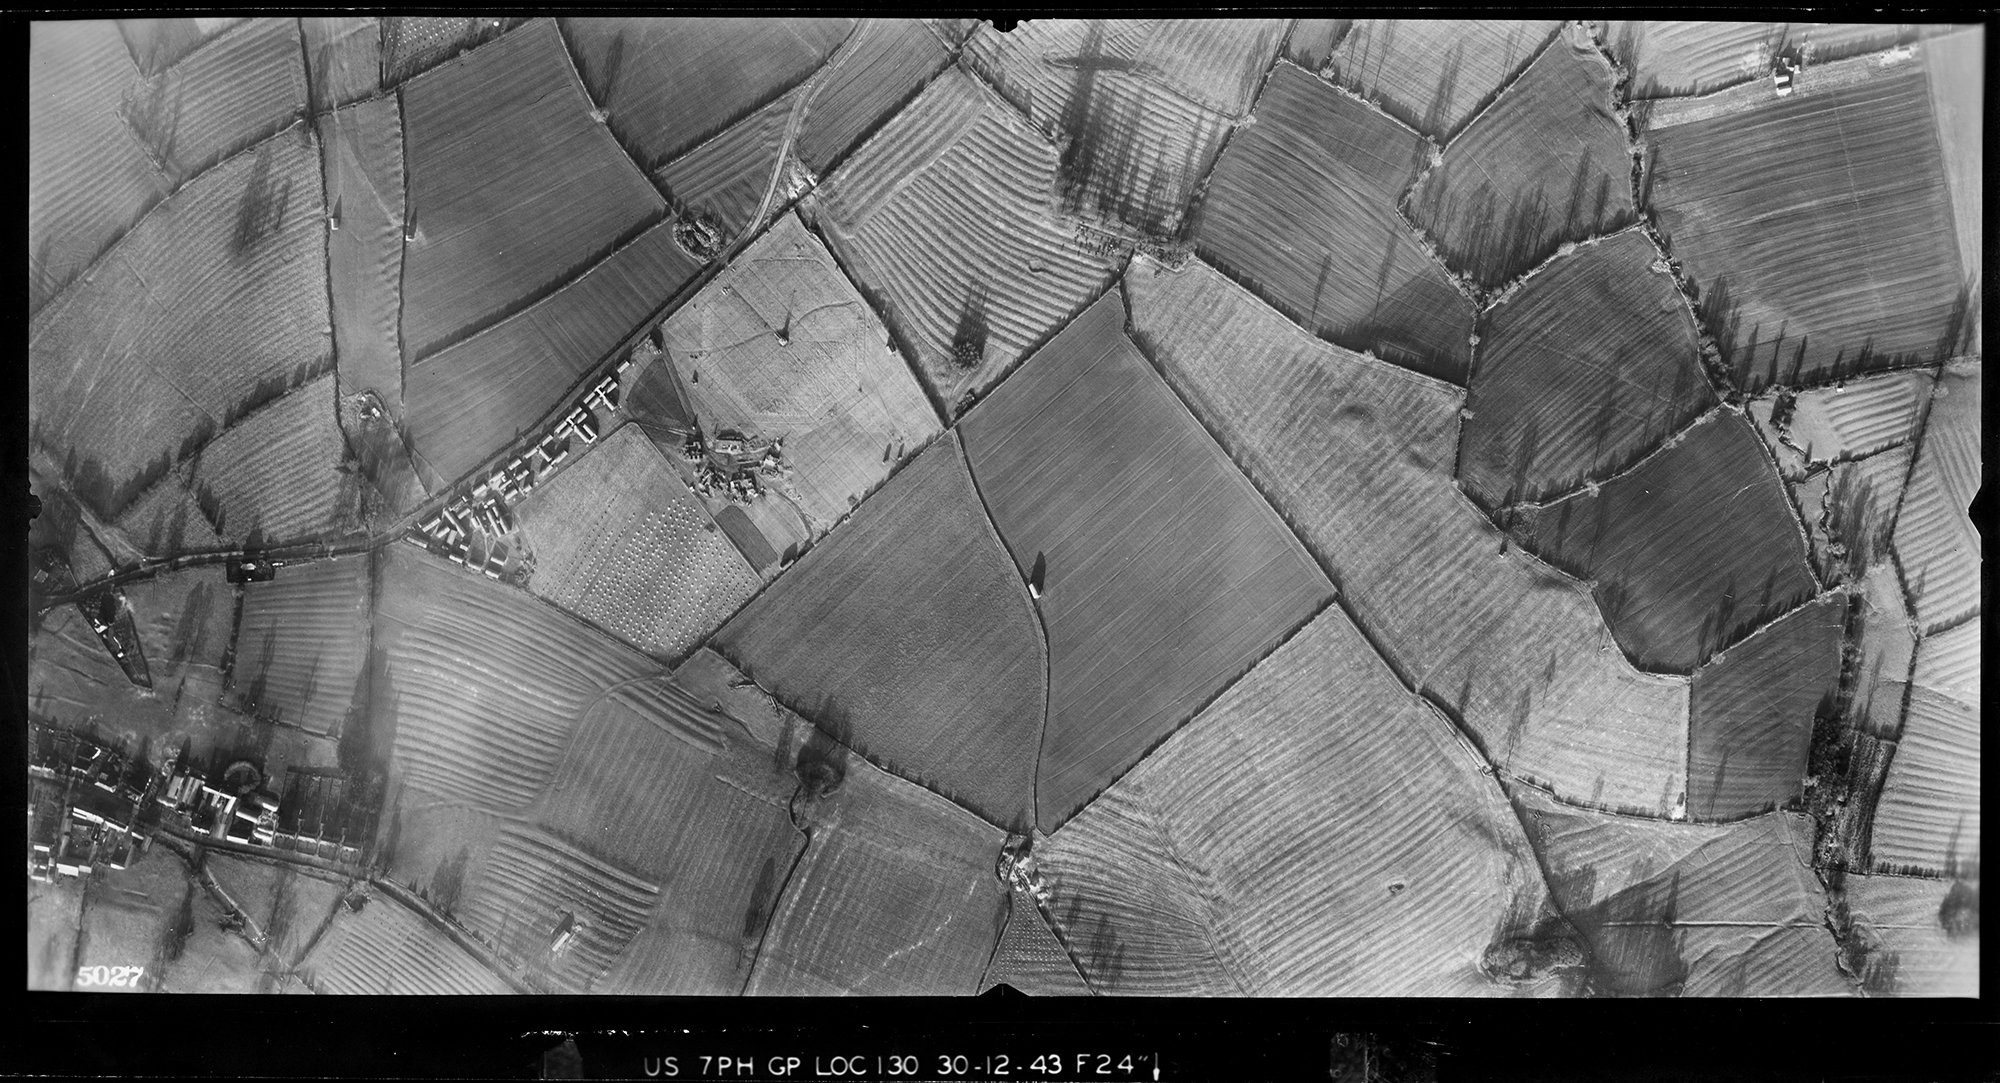 A black and white vertical aerial photograph showing a patchwork of irregular fields bounded by hedges and tracks. Several of the fields contain parallel lines of ridge and furrow ploughing.